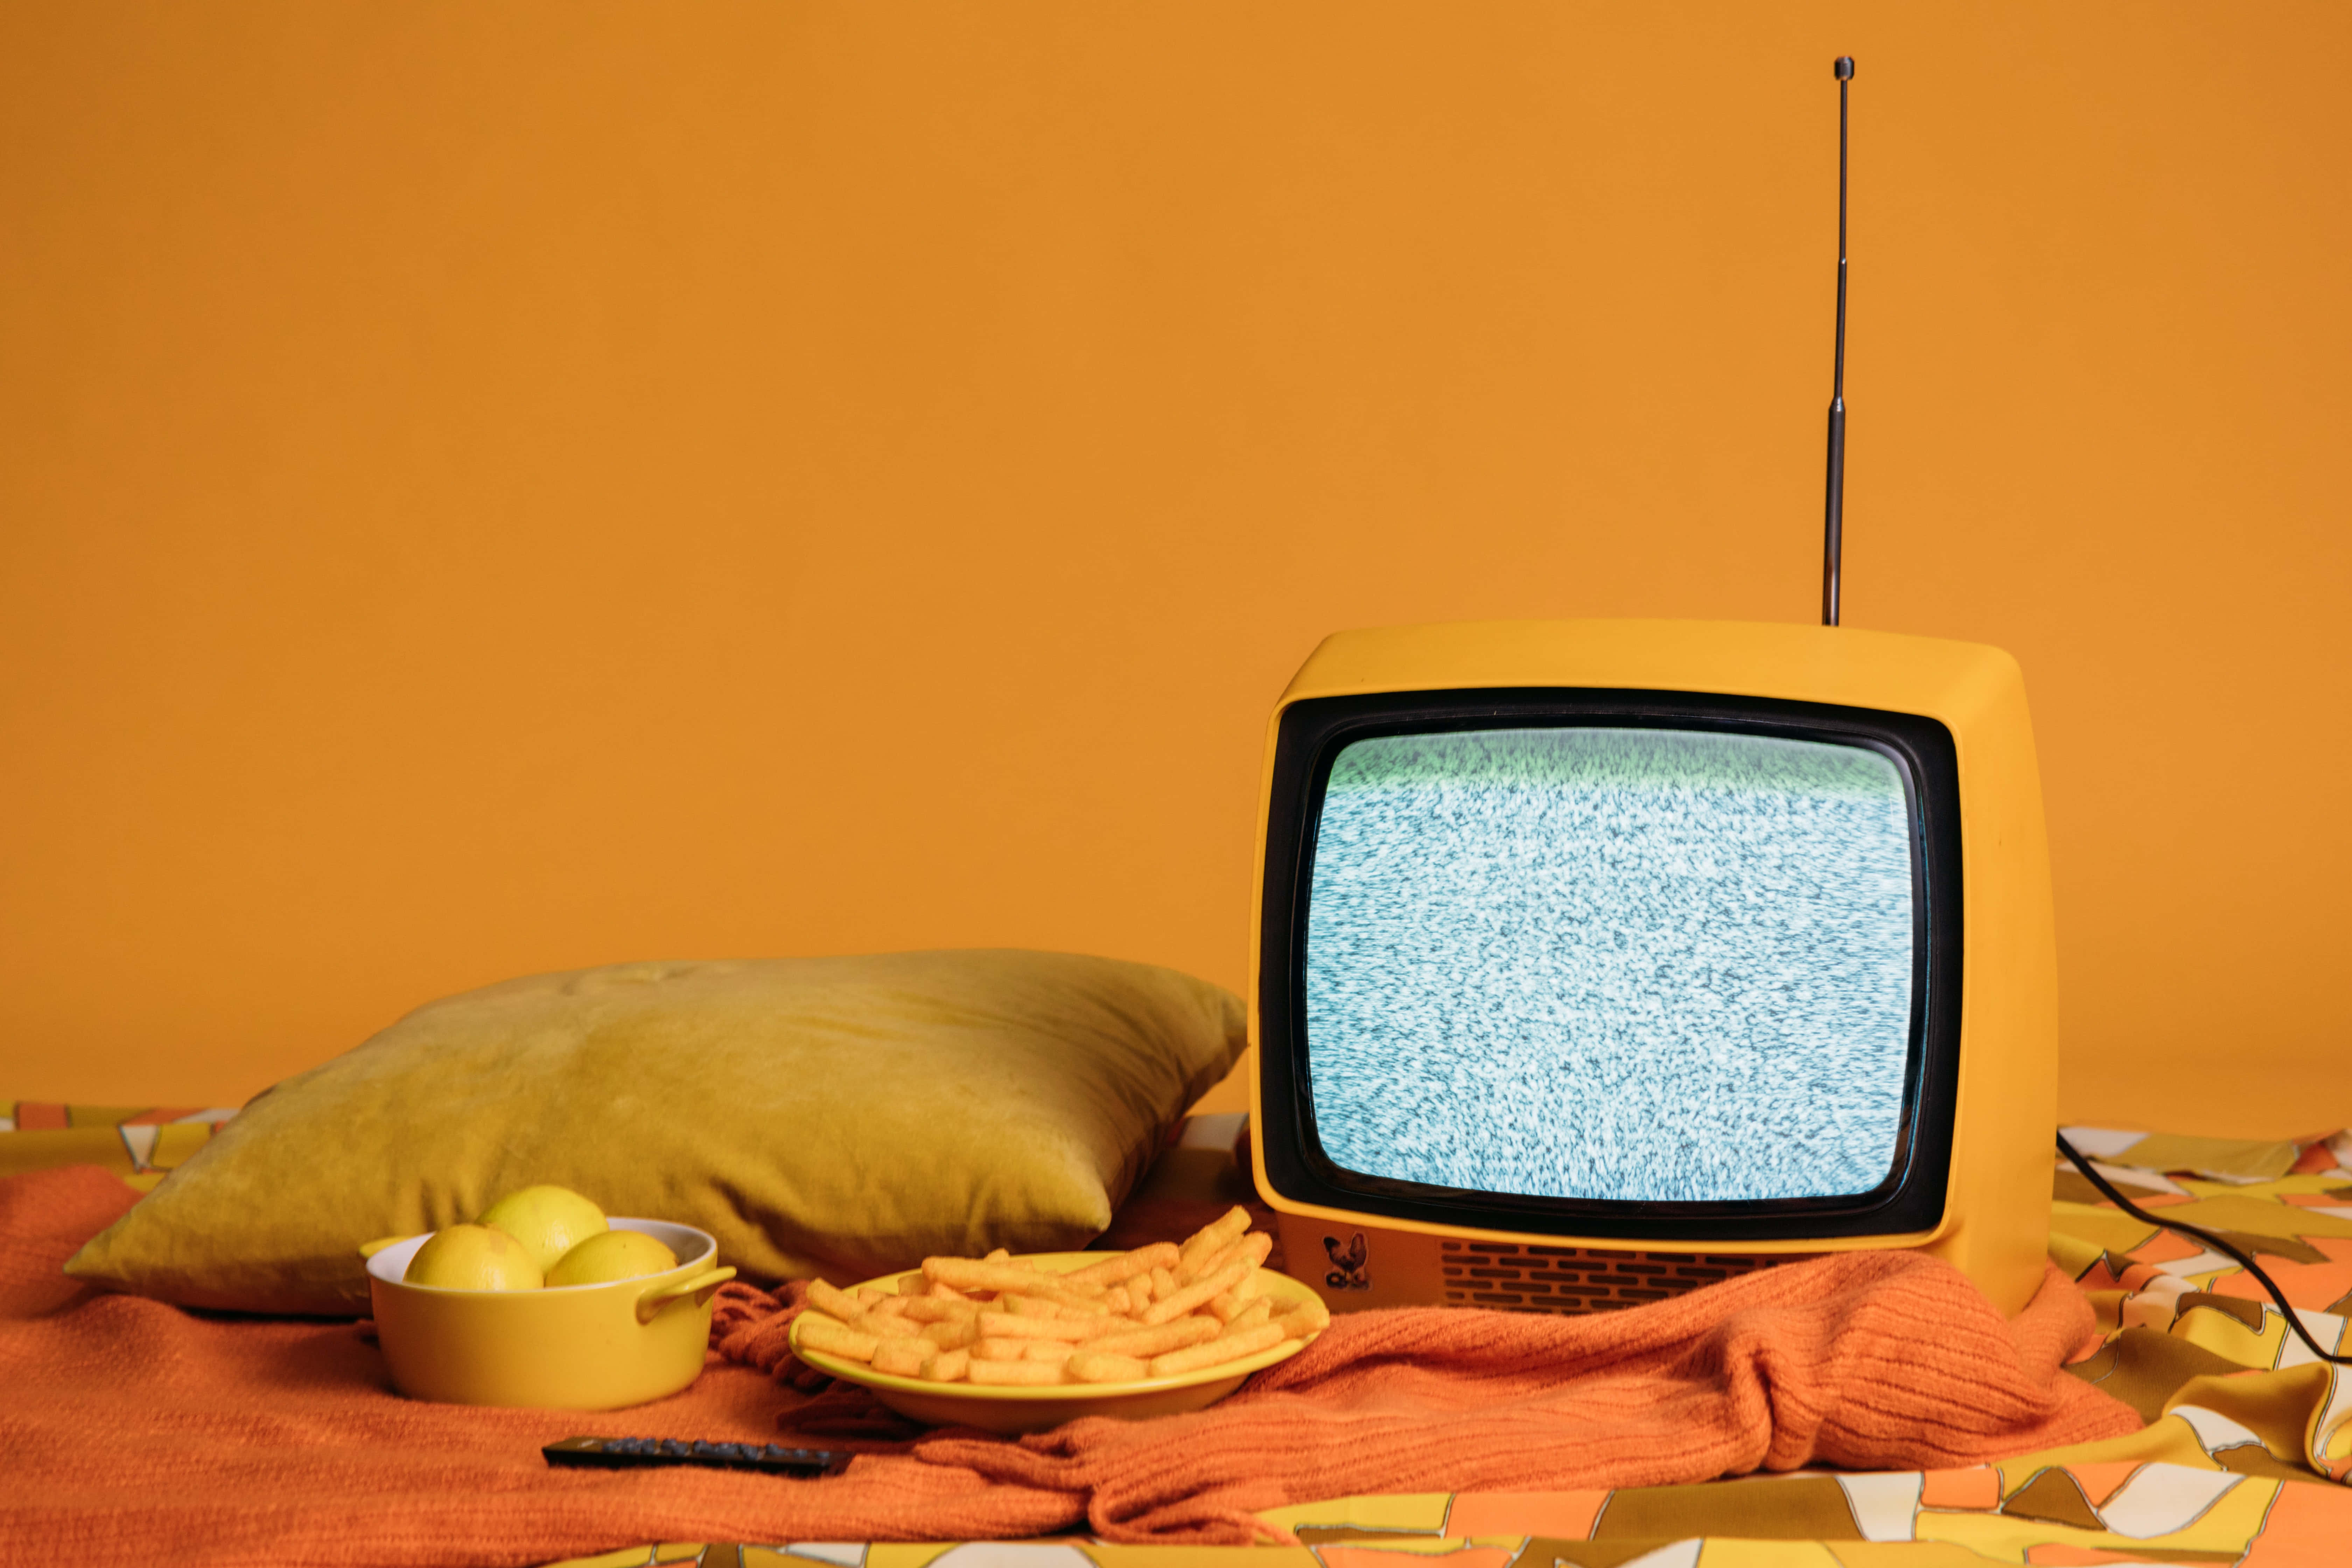 A Yellow Tv On A Yellow Blanket